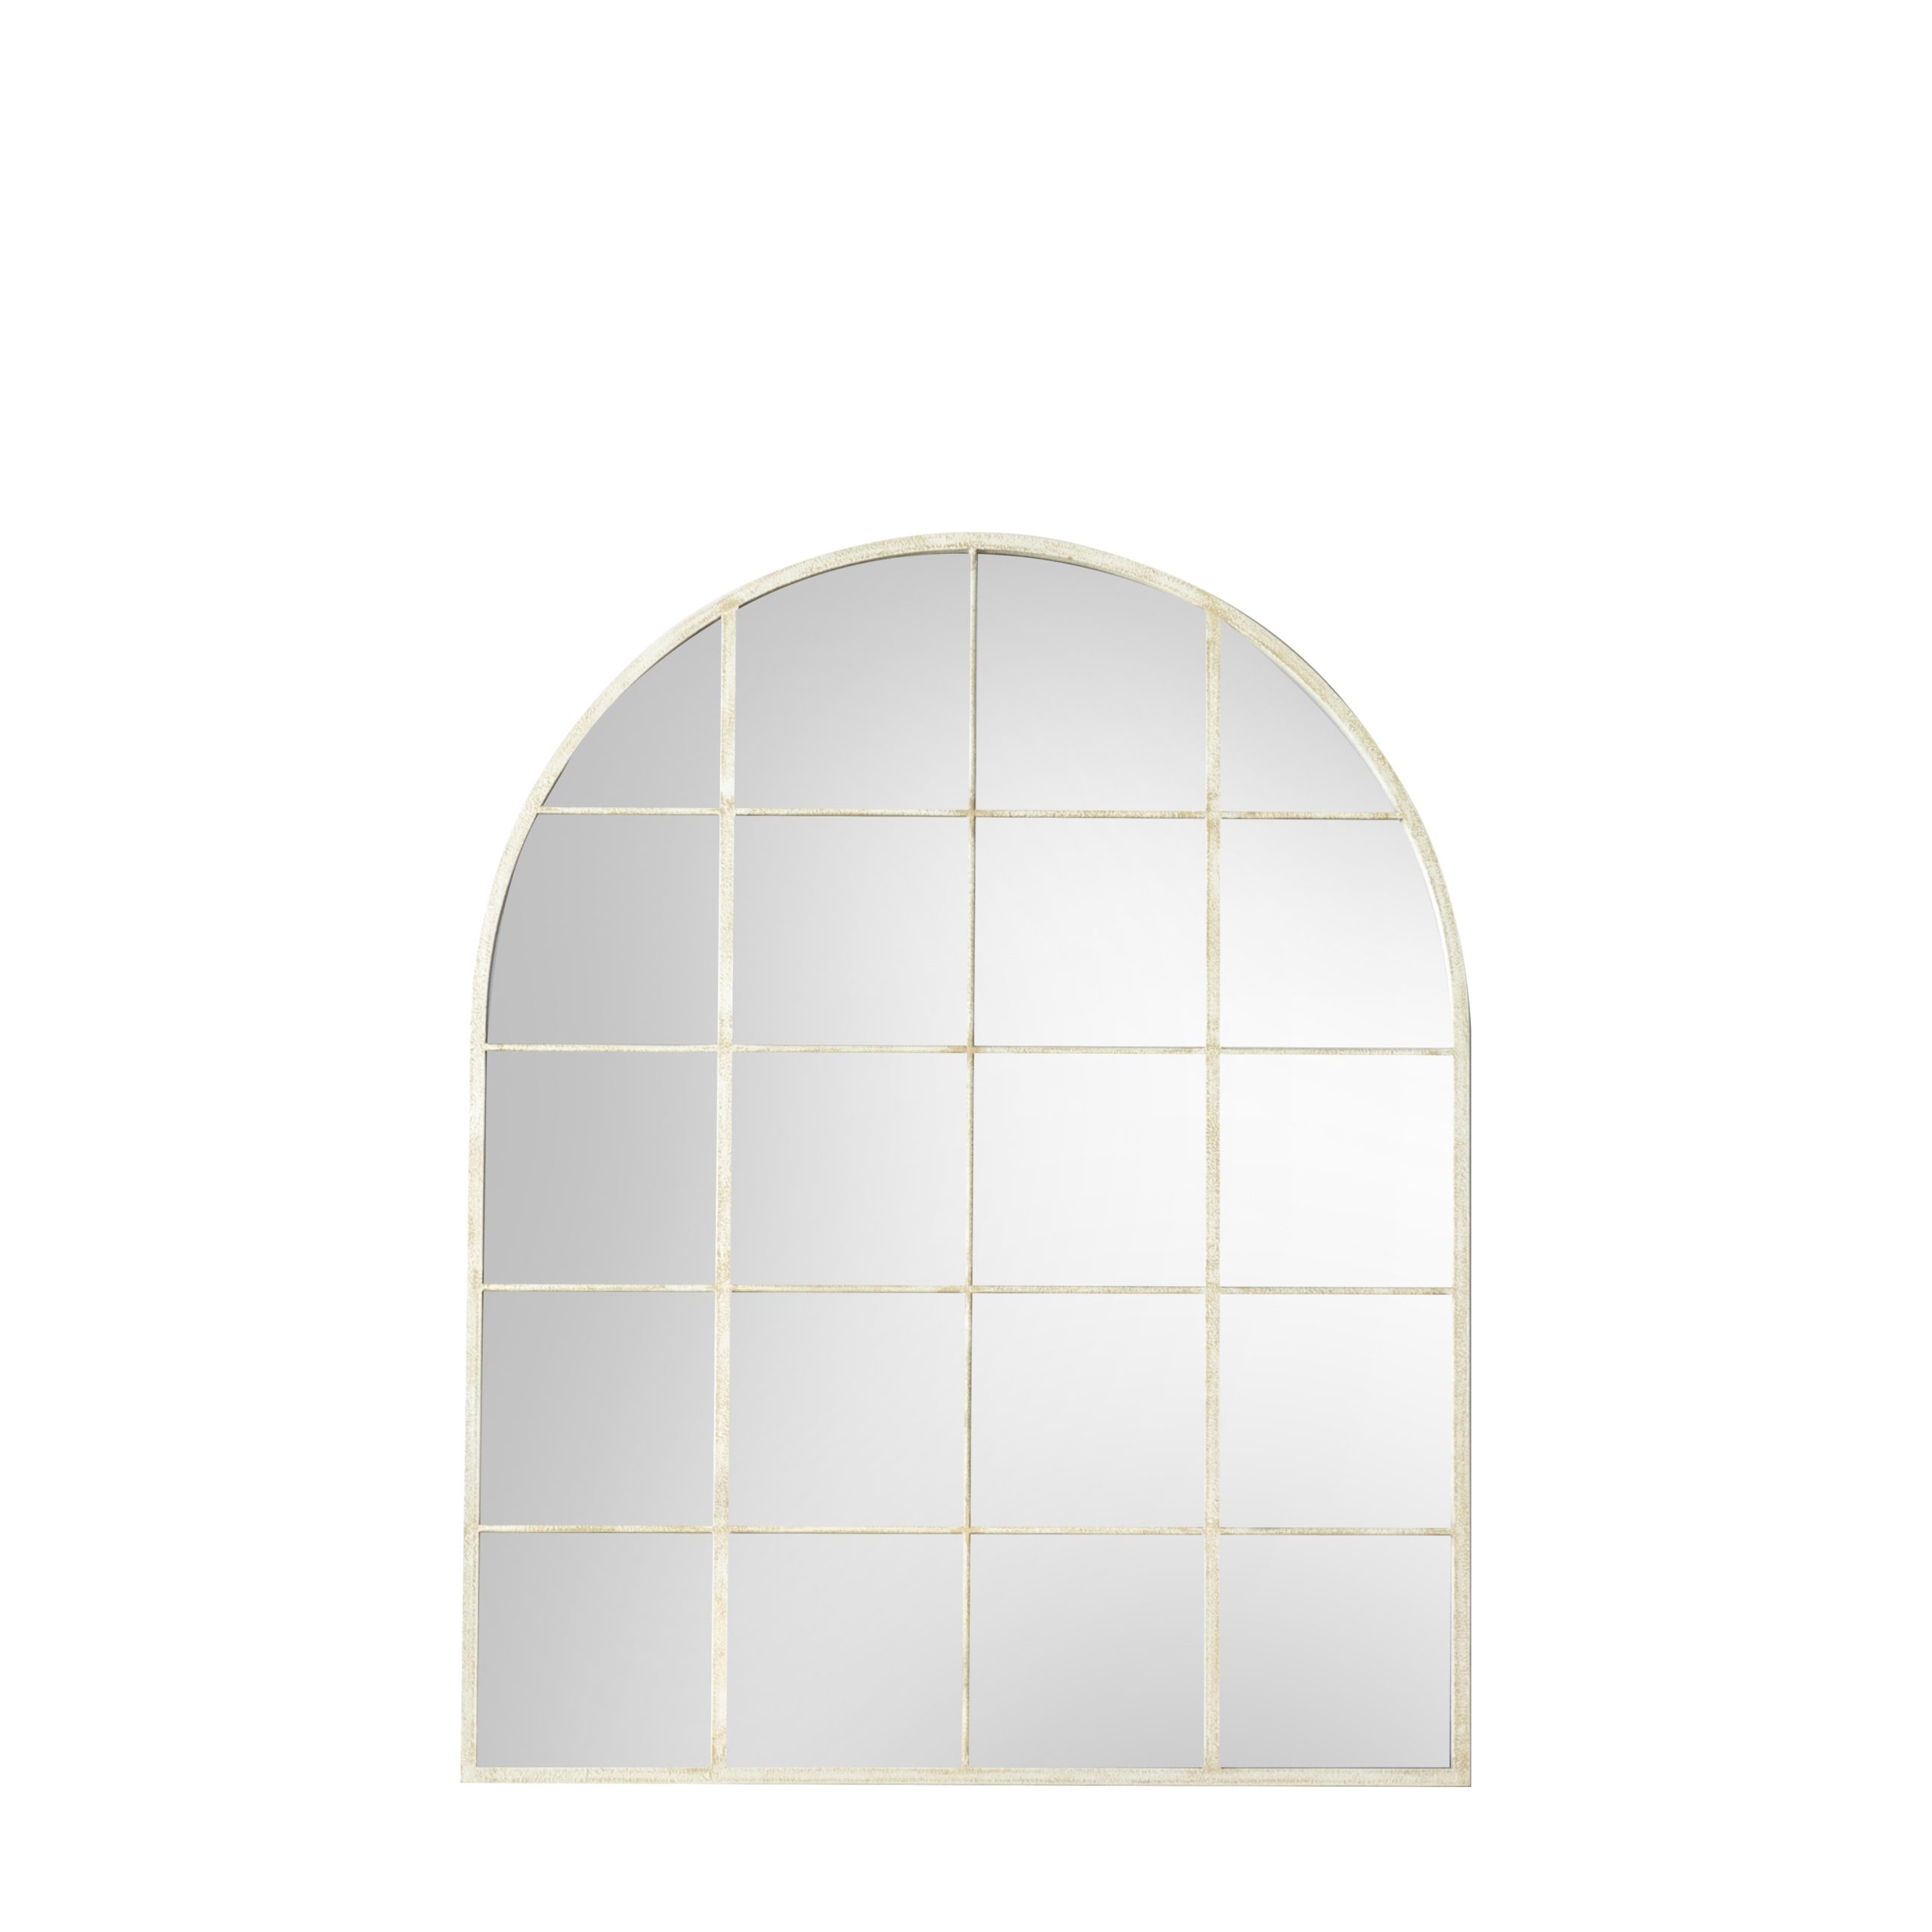 Gallery Direct Hampstead Arch Mirror White